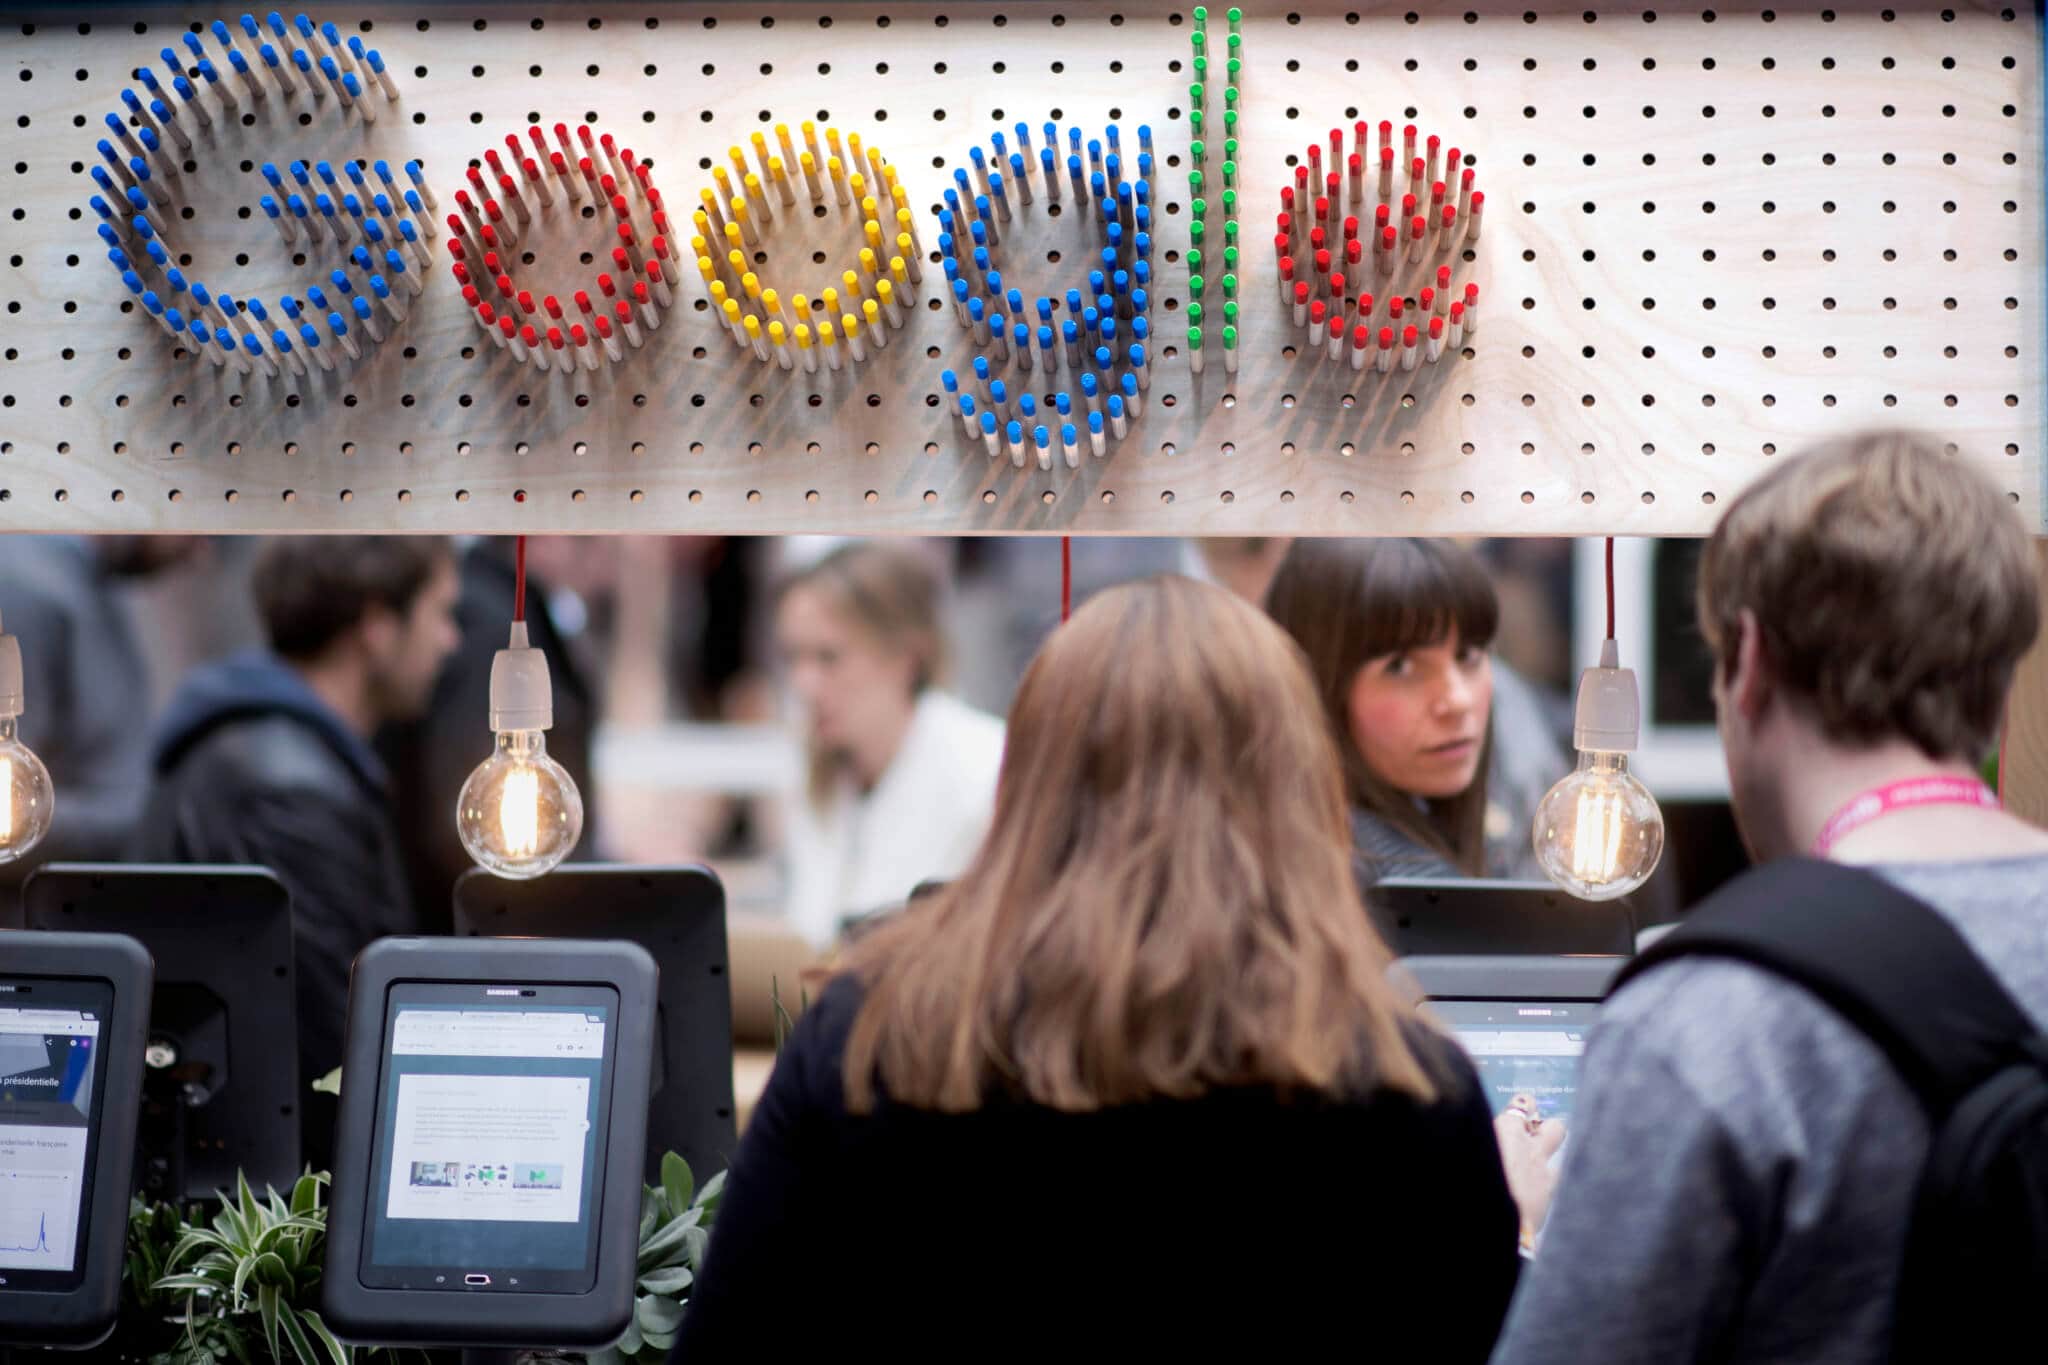 Google: New Guiding Principles on AI show progress but still fall short on human rights protections - Digital